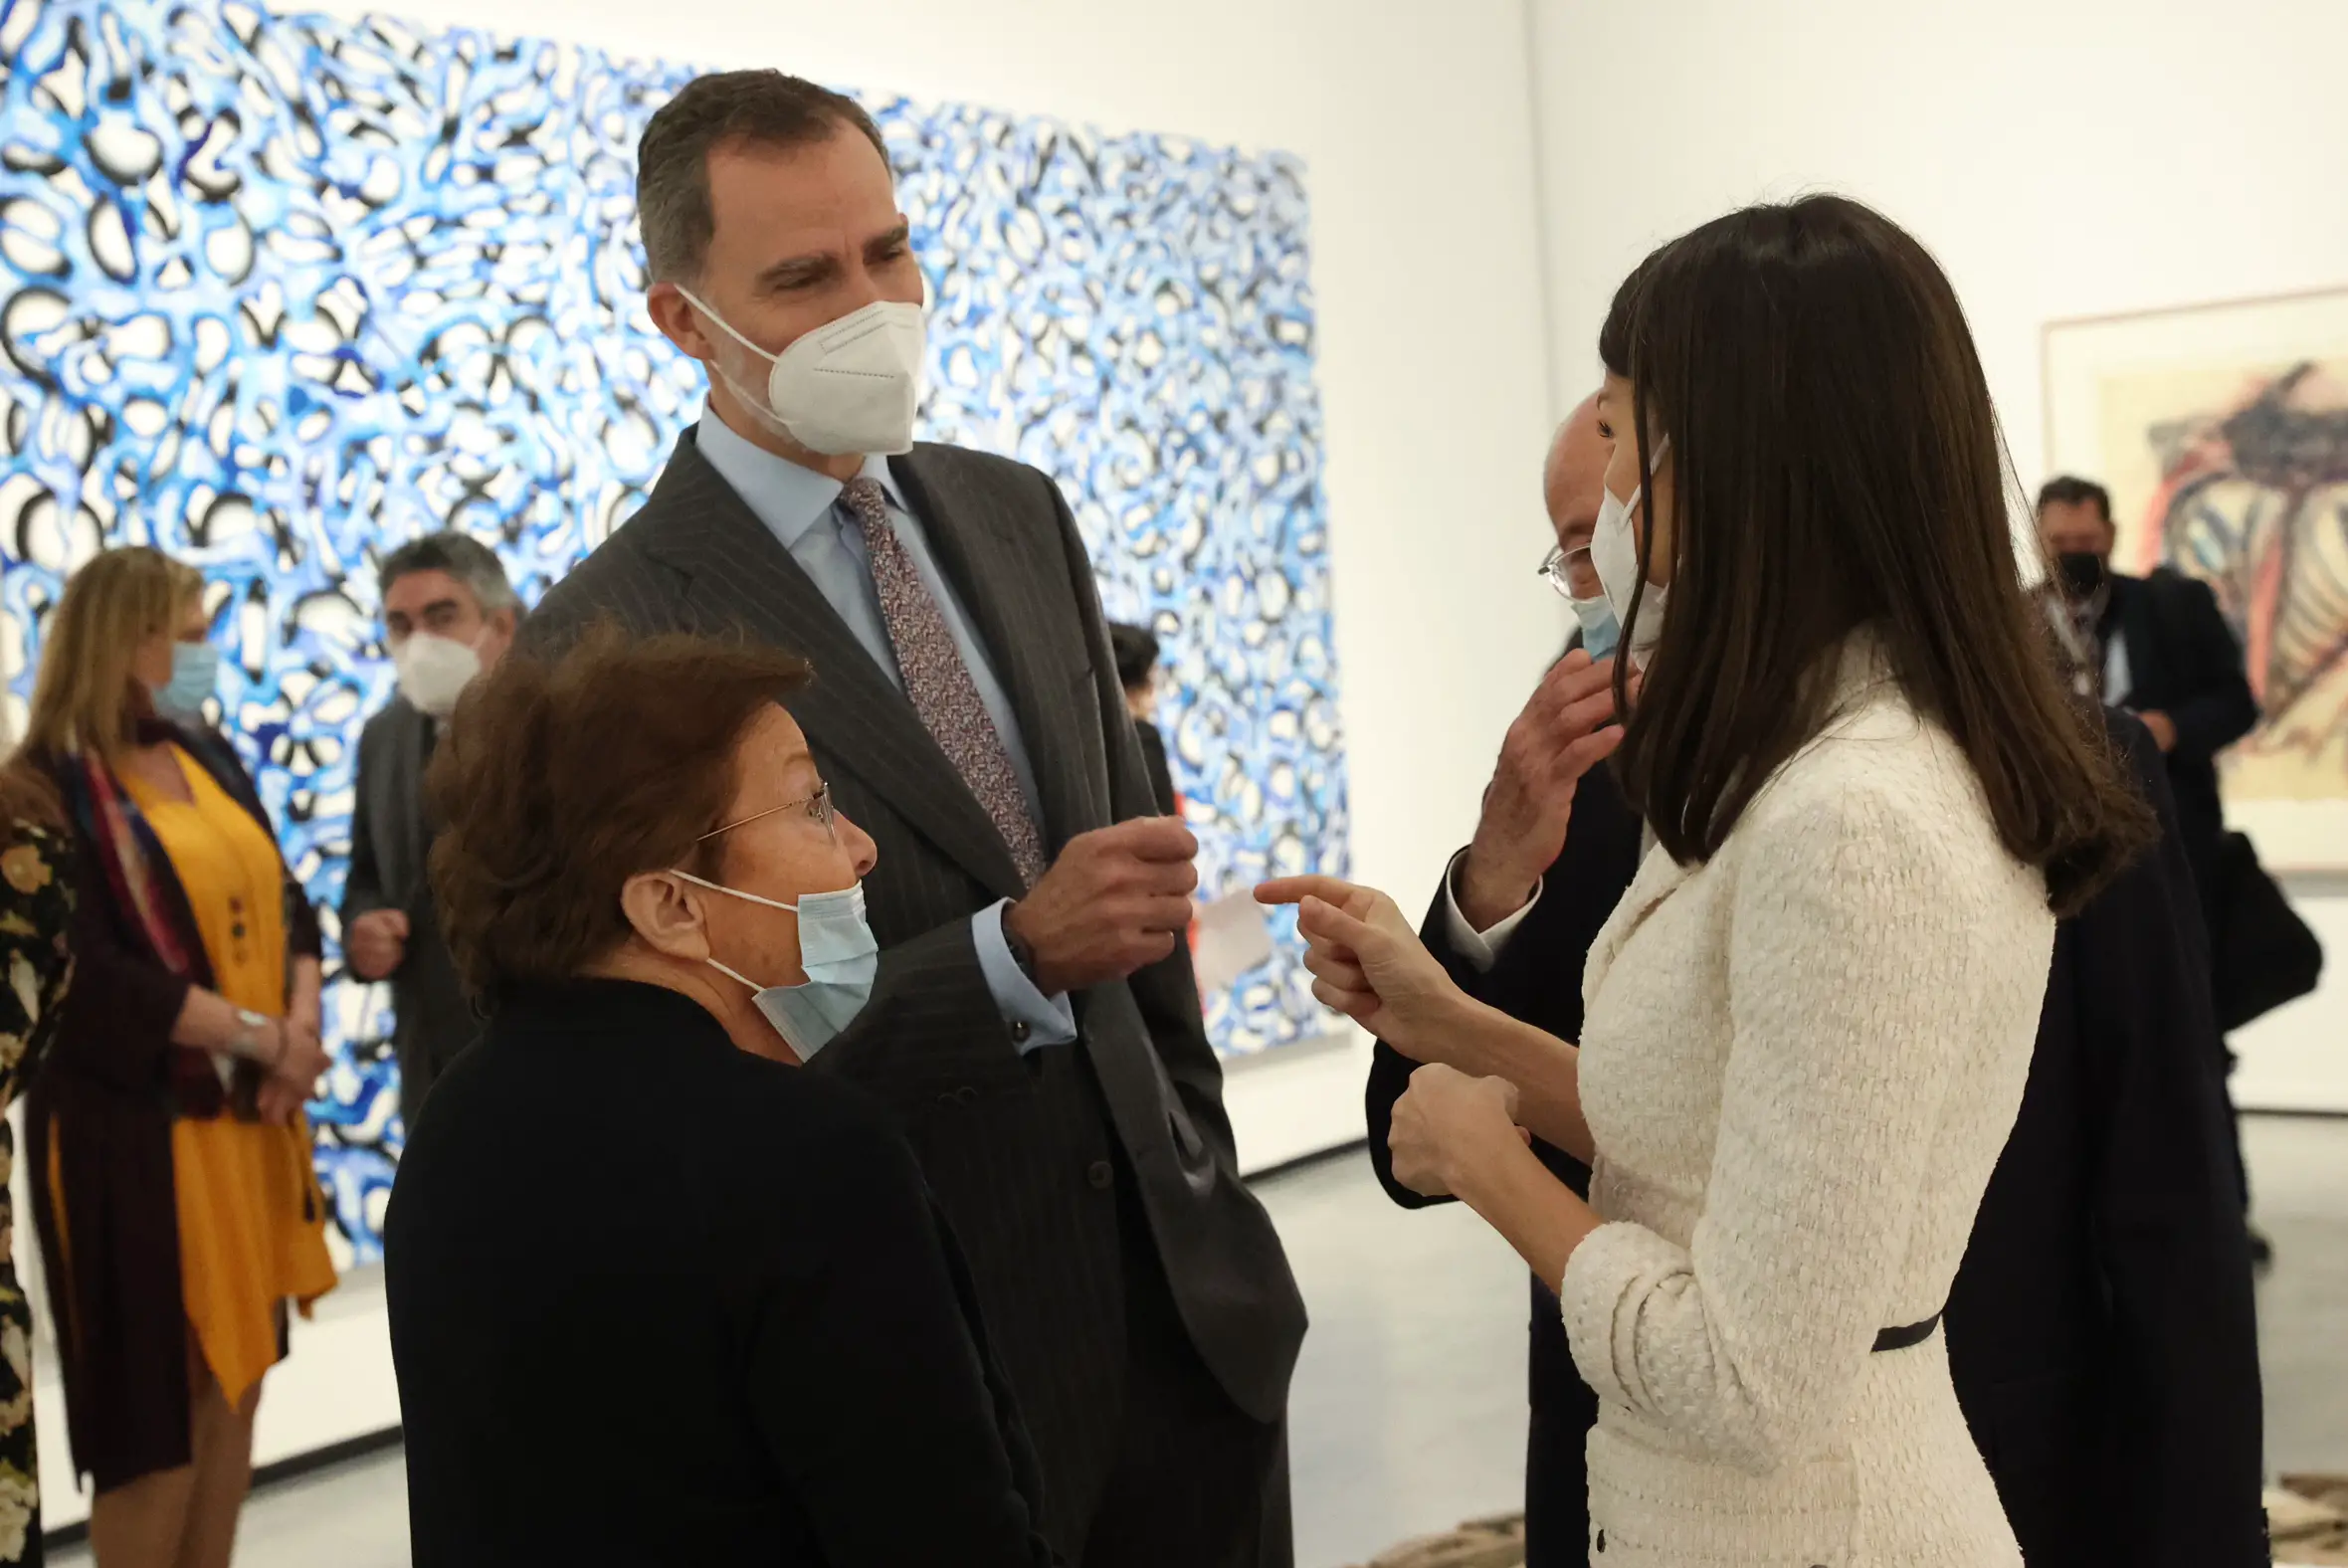 King Felipe and Queen Letizia signed the Museum's Book of Honor and had a brief meeting with the attendees before leaving.